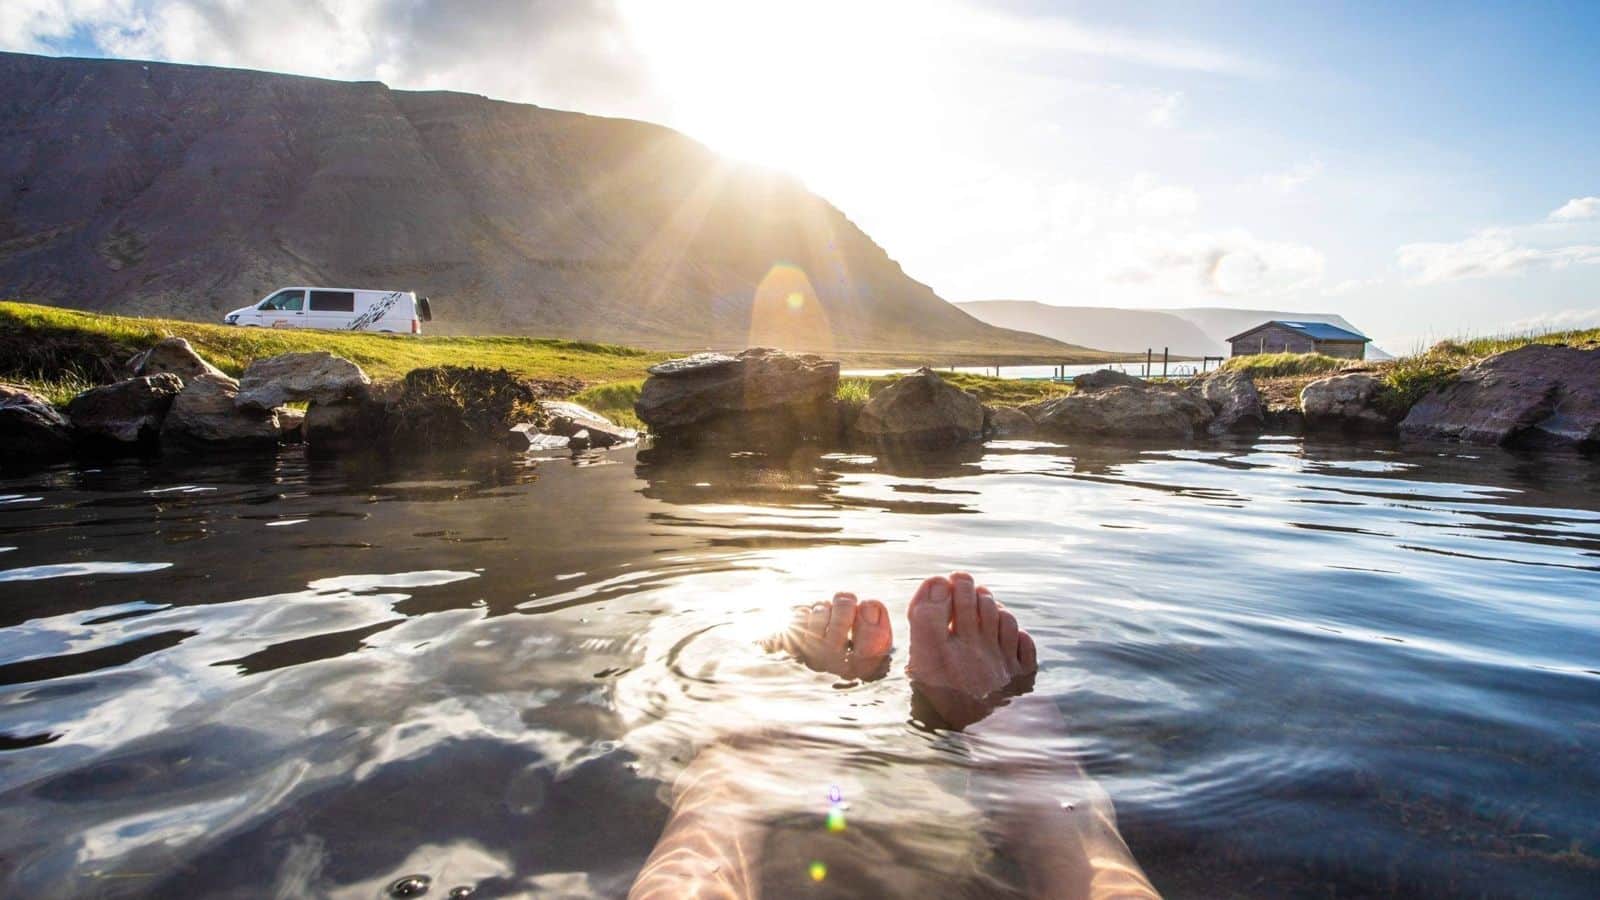 Have you been to Iceland's hidden hot spring havens